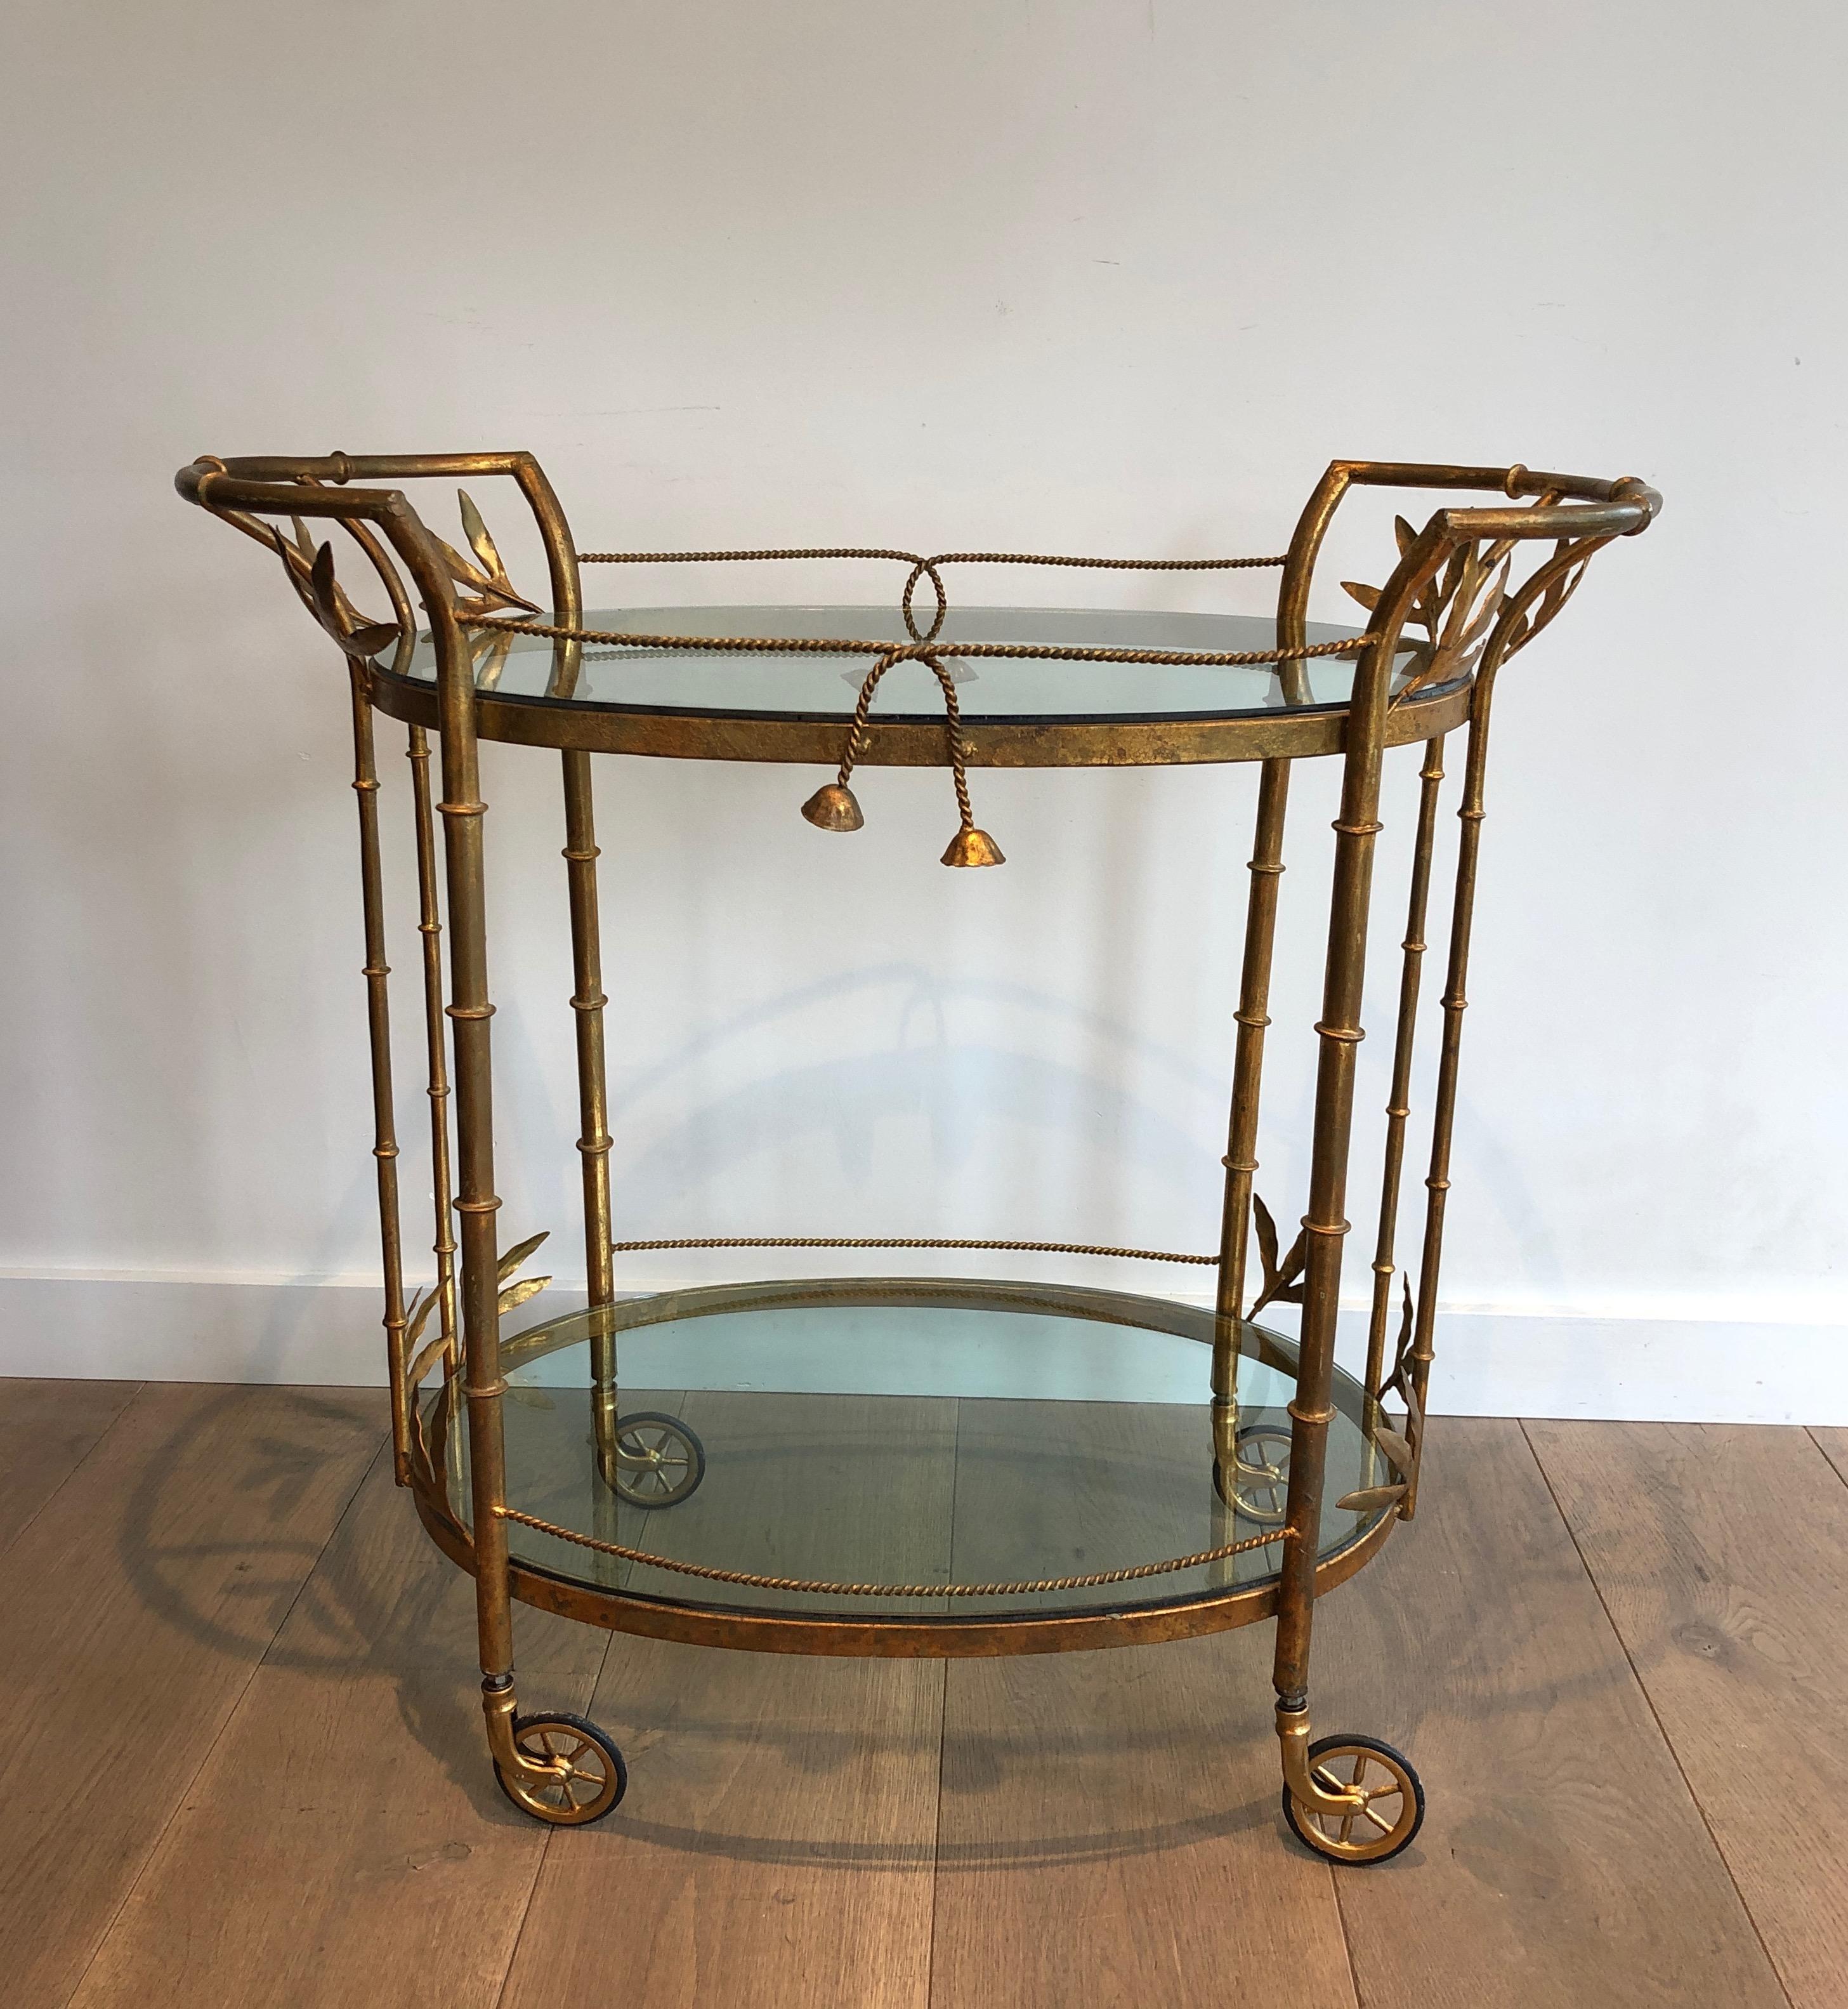 This faux-bamboo drinks trolley is made of gilt metal and blueish glass. This bar cart is a very rare model. This is a French work attributed to Coco Chanel. Circa 1970